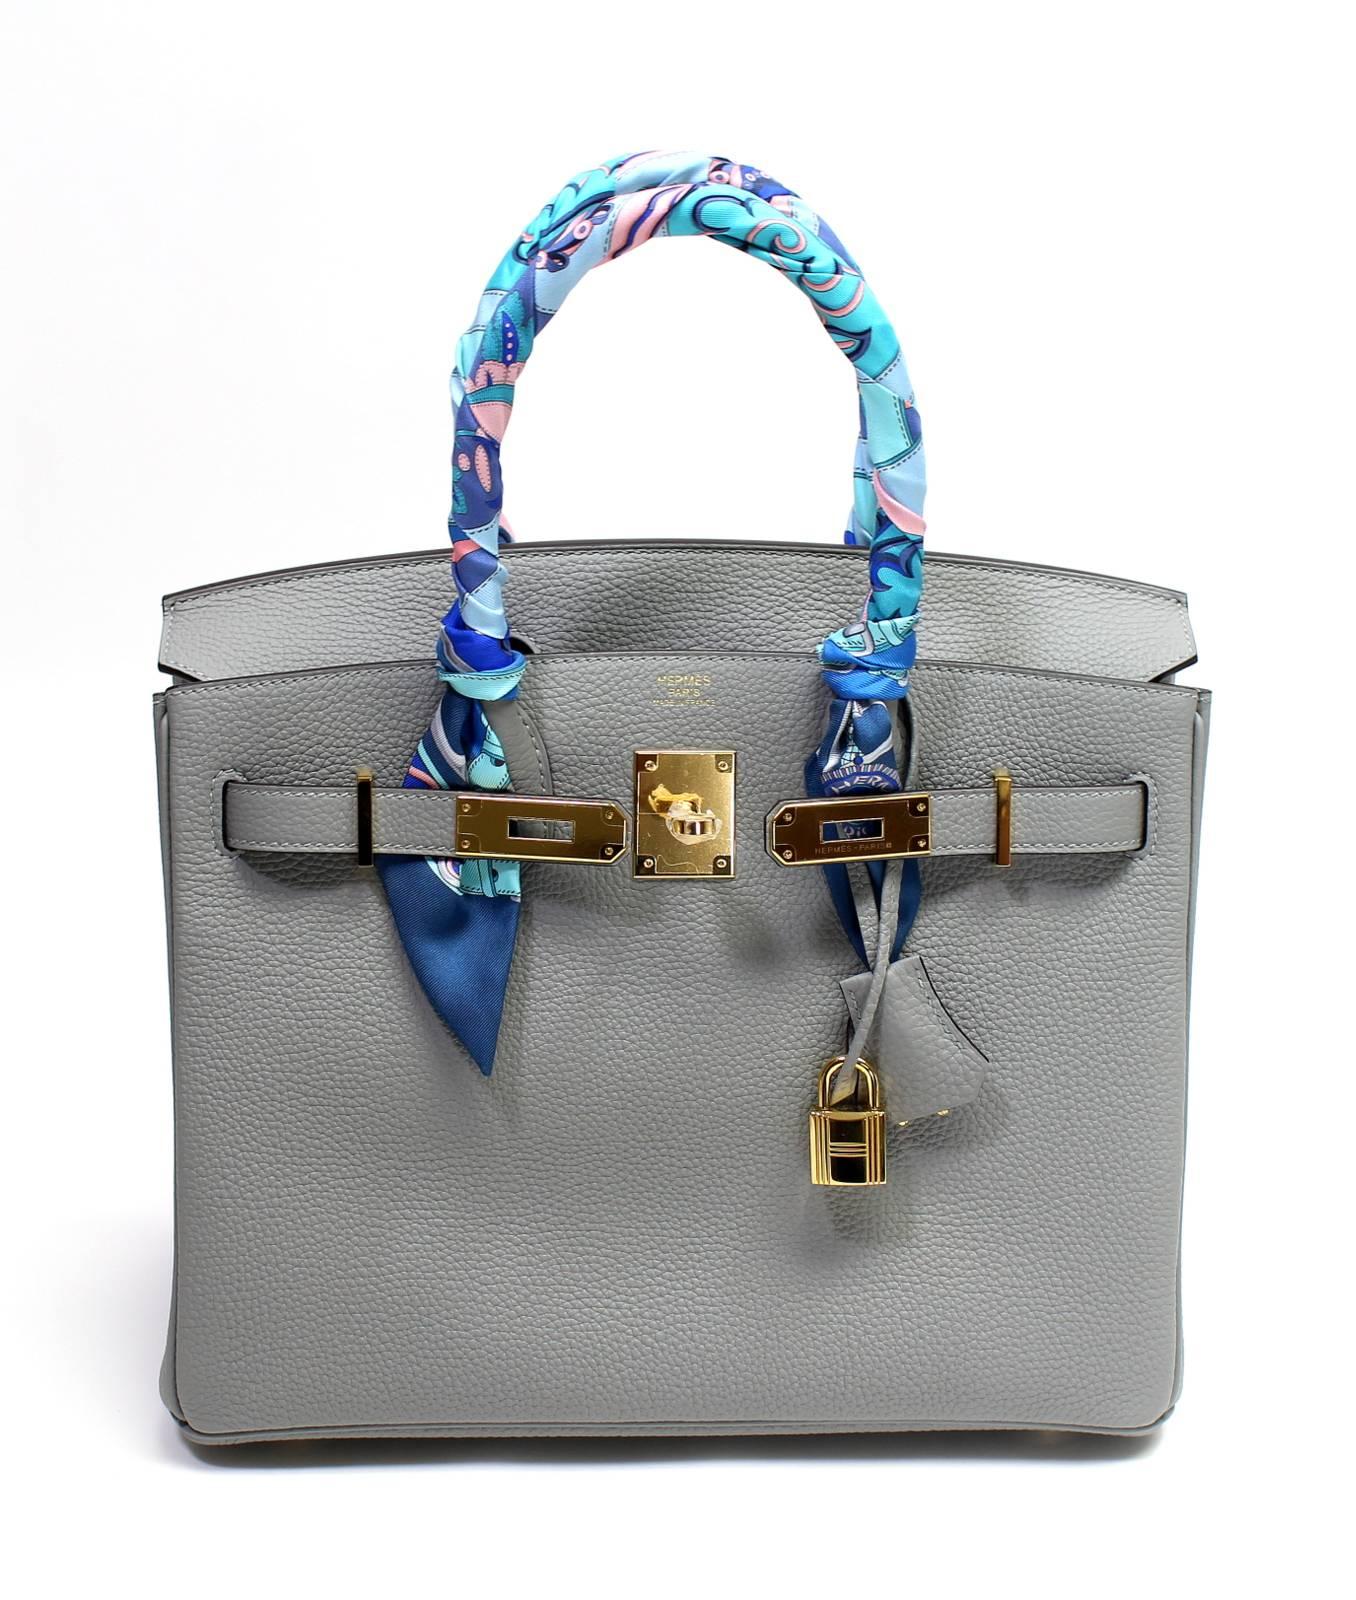 Hermès Gris Mouette Togo Leather Birkin- 30 cm, GHW, X Stamp
 Store Fresh- plastic intact on all hardware.  Includes padlock, keys, clochette, protective felt, raincoat, dust bags and Hermès box with tissue.  Twilly NOT included.
 Newest neutral